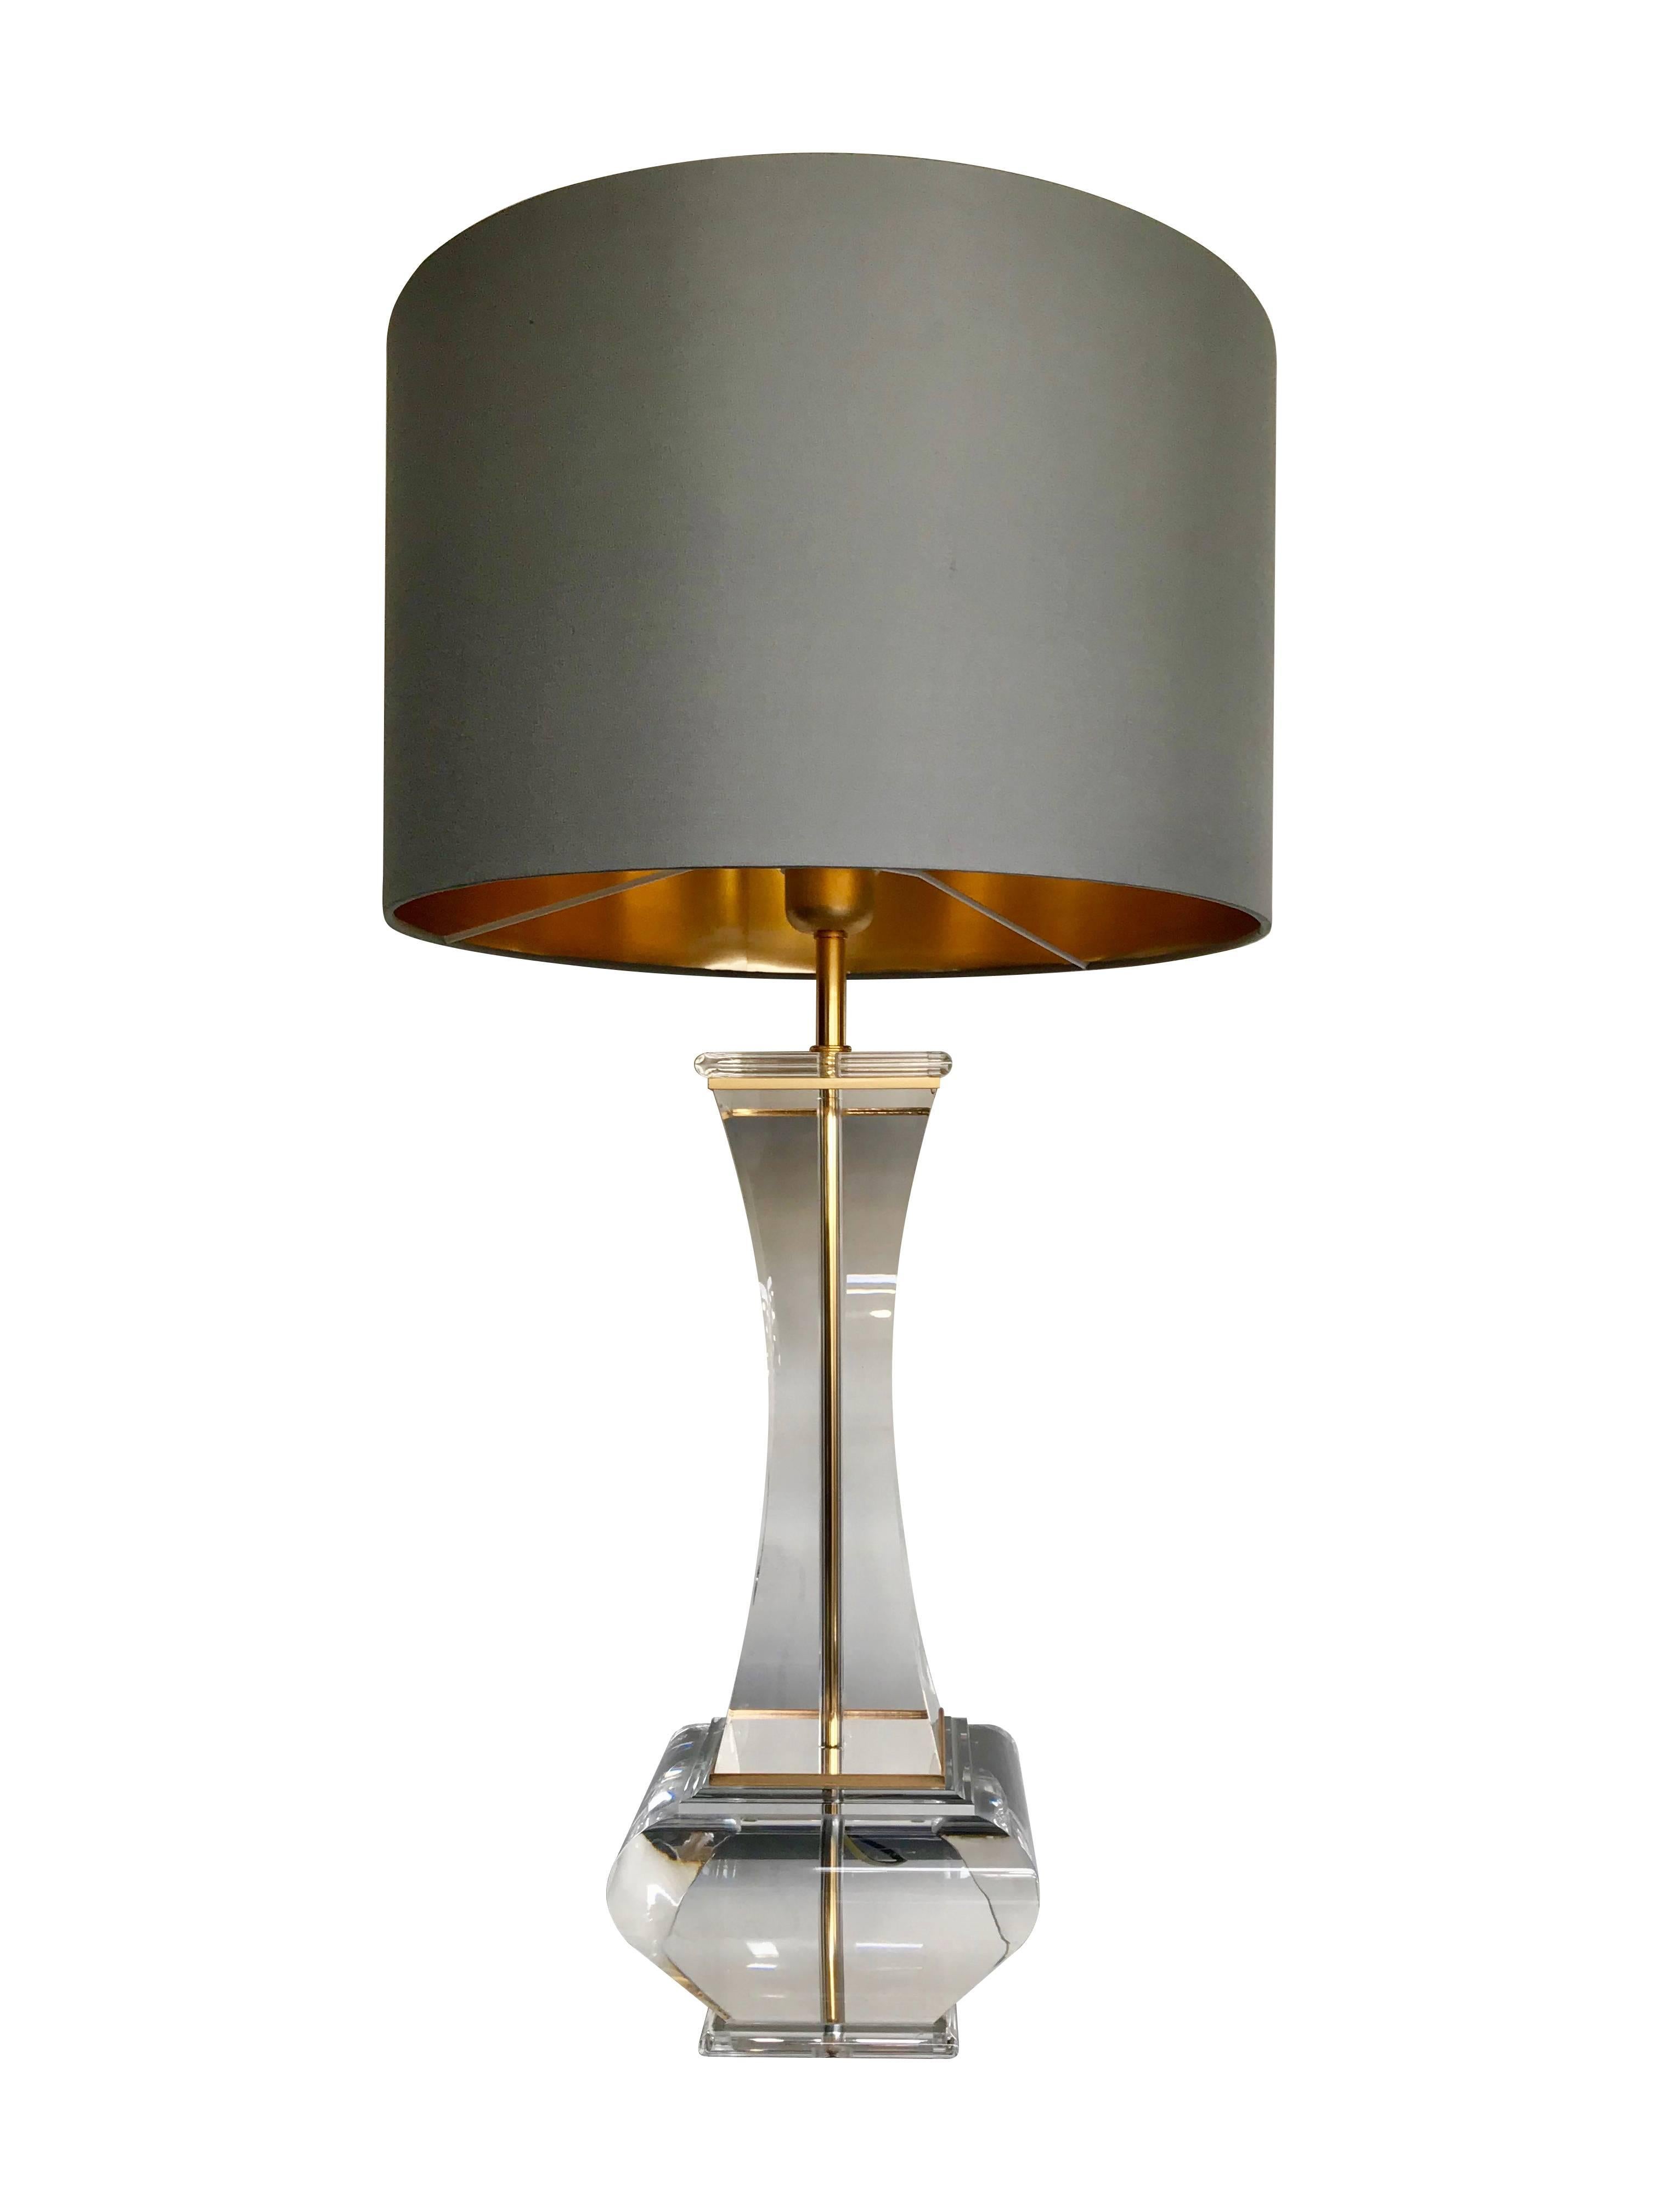 A pair of large Lucite lamps with gilt metal trim detailing around the top and base. With new bespoke circular shades in slate grey with gold linings. Re wired with new fittings, antique cord flex and PAT tested. Height is listed without shade 56cm